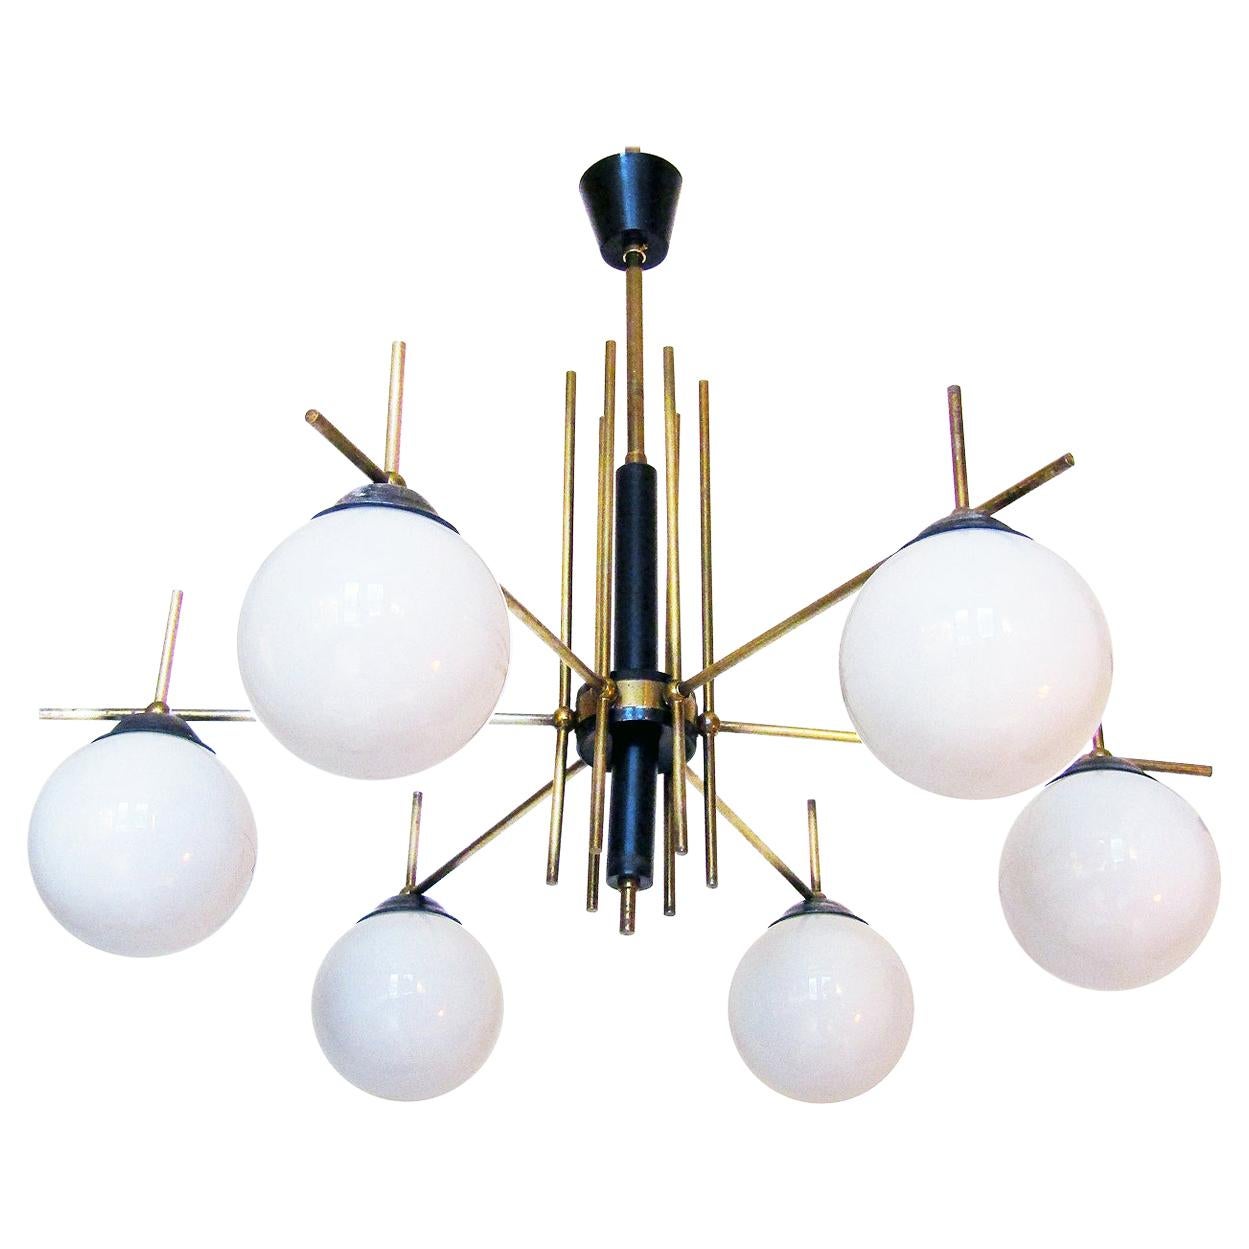 Large Italian 1950s Globe Chandelier in Brass and Glass in the style of Stilnovo